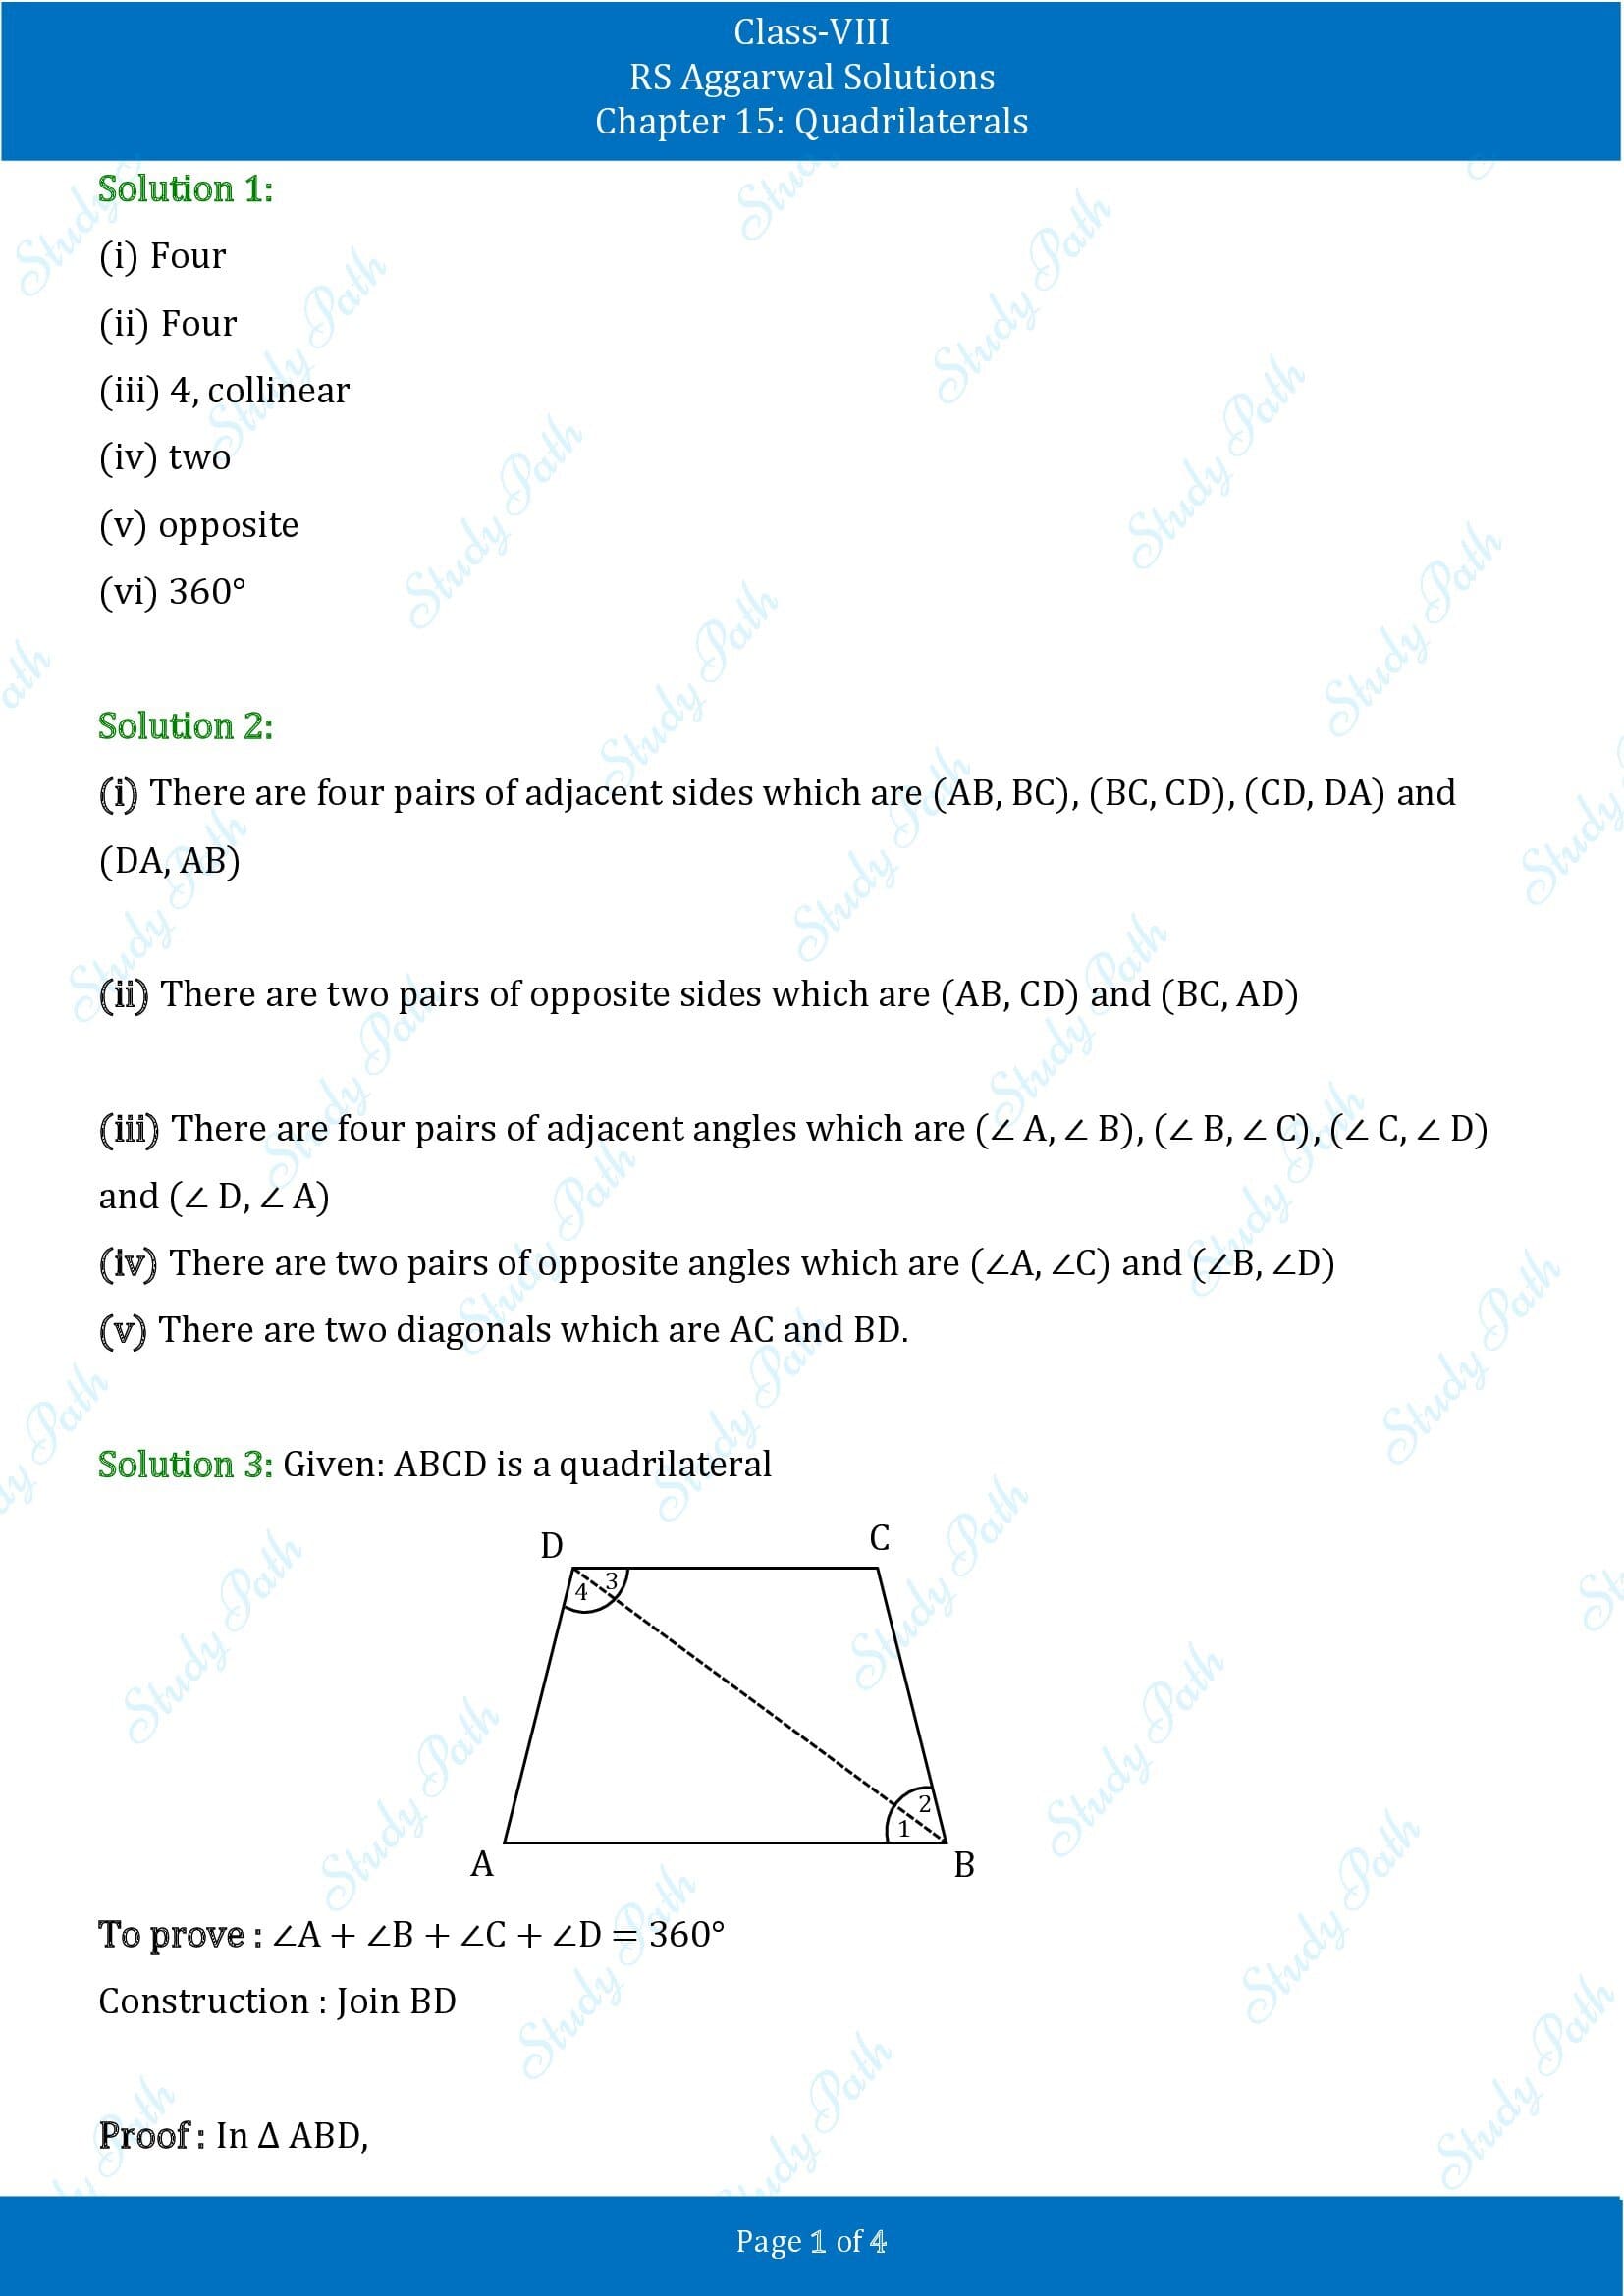 RS Aggarwal Solutions Class 8 Chapter 15 Quadrilaterals 00001